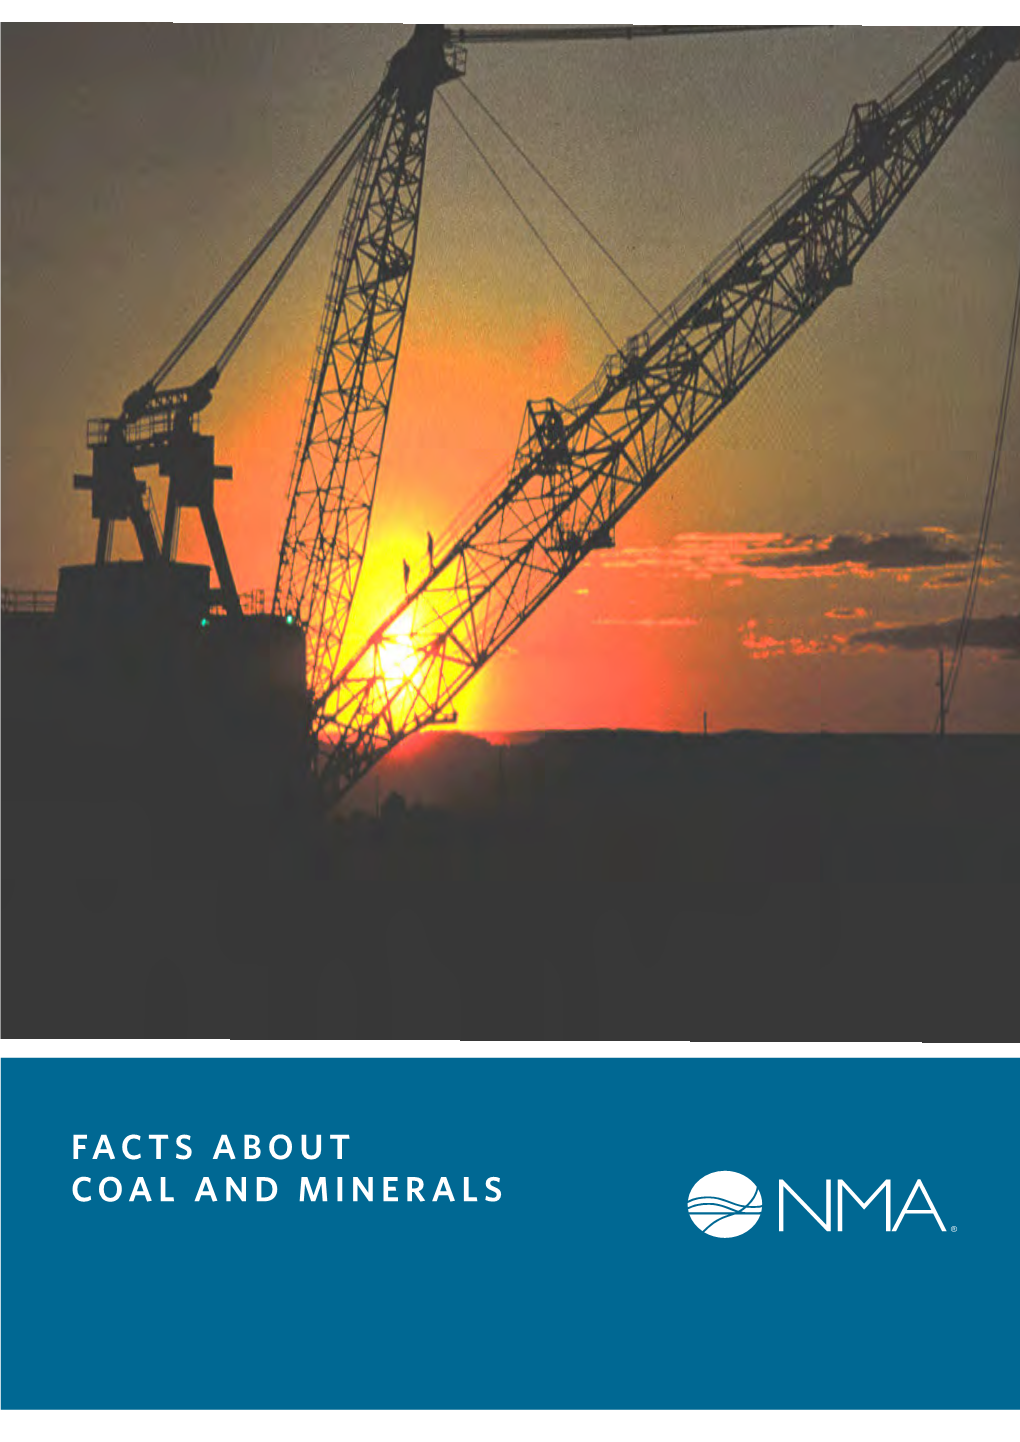 Facts About Coal and Minerals Contents